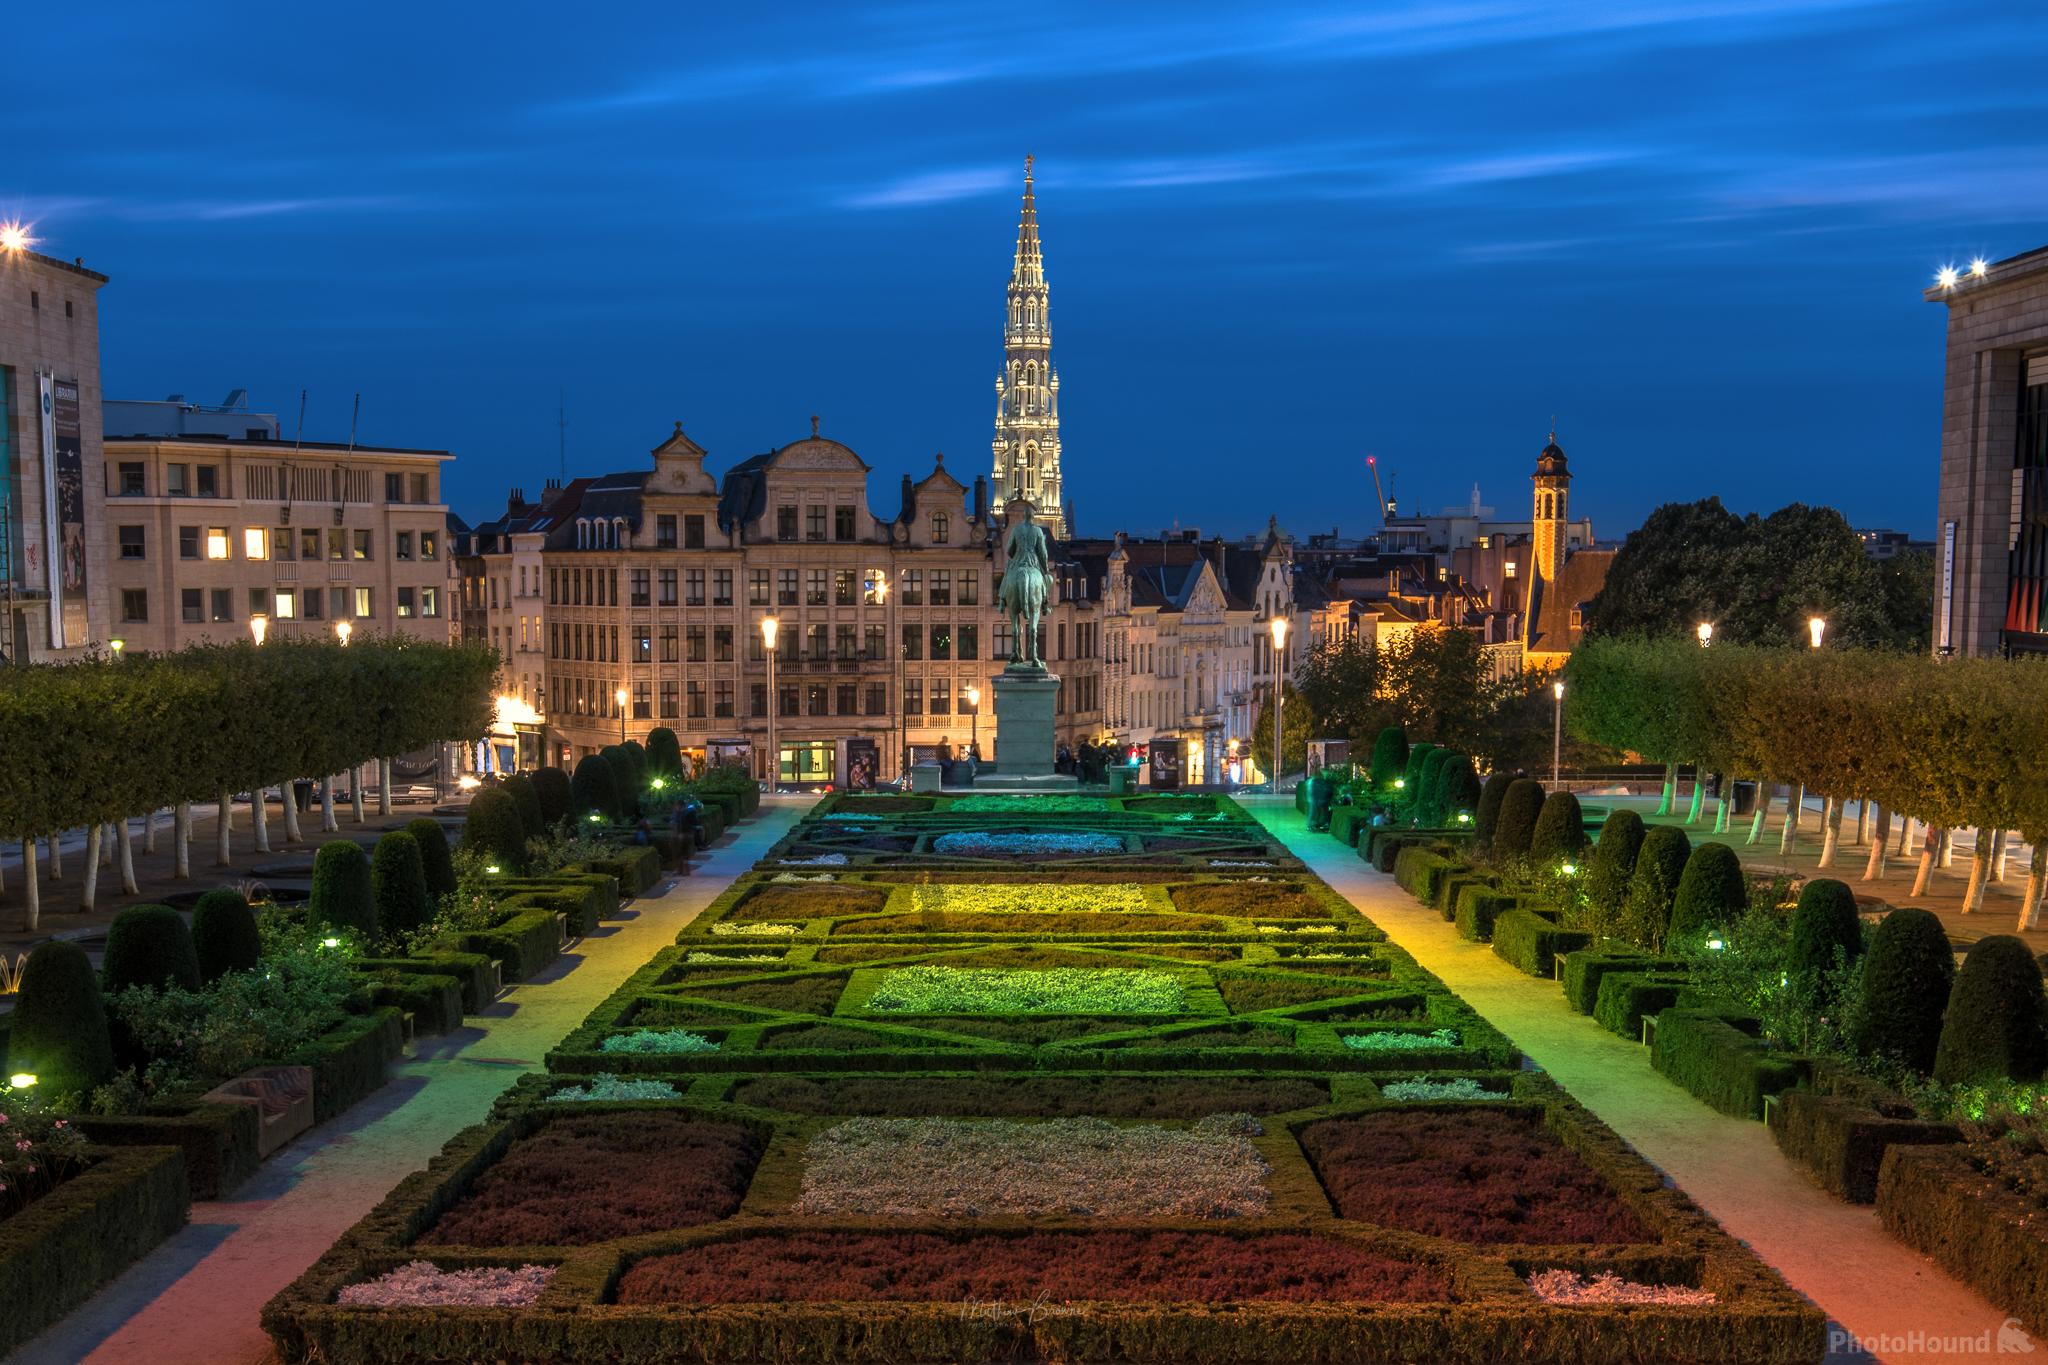 Brussels photo guide photo guide